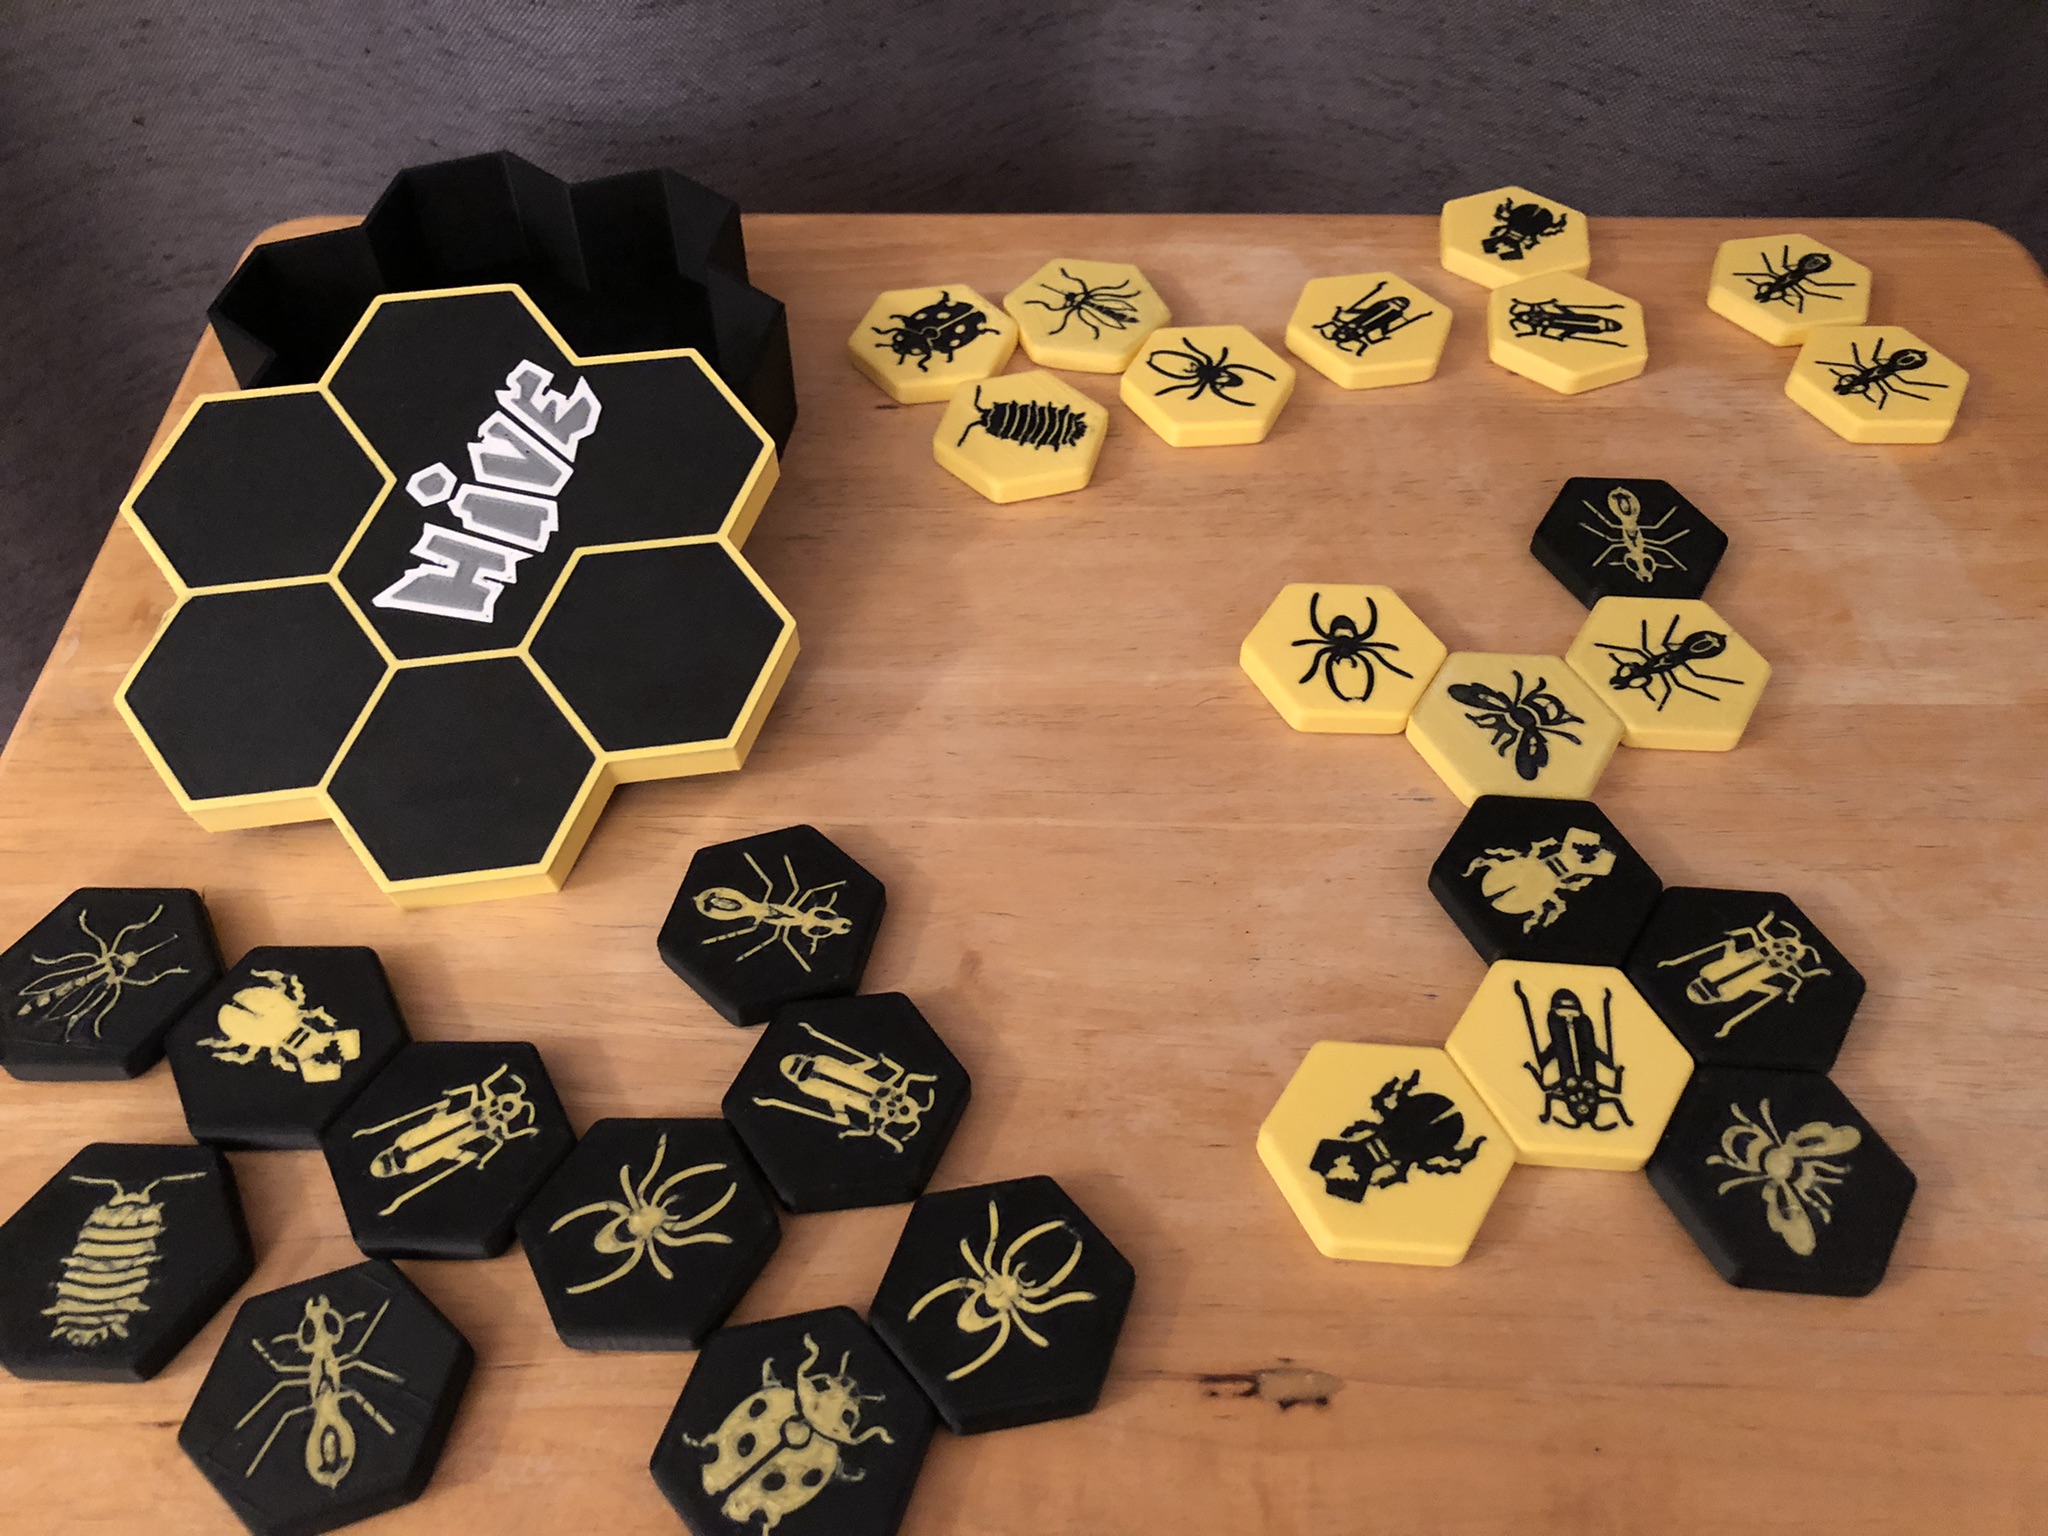 Hive - Complete Game